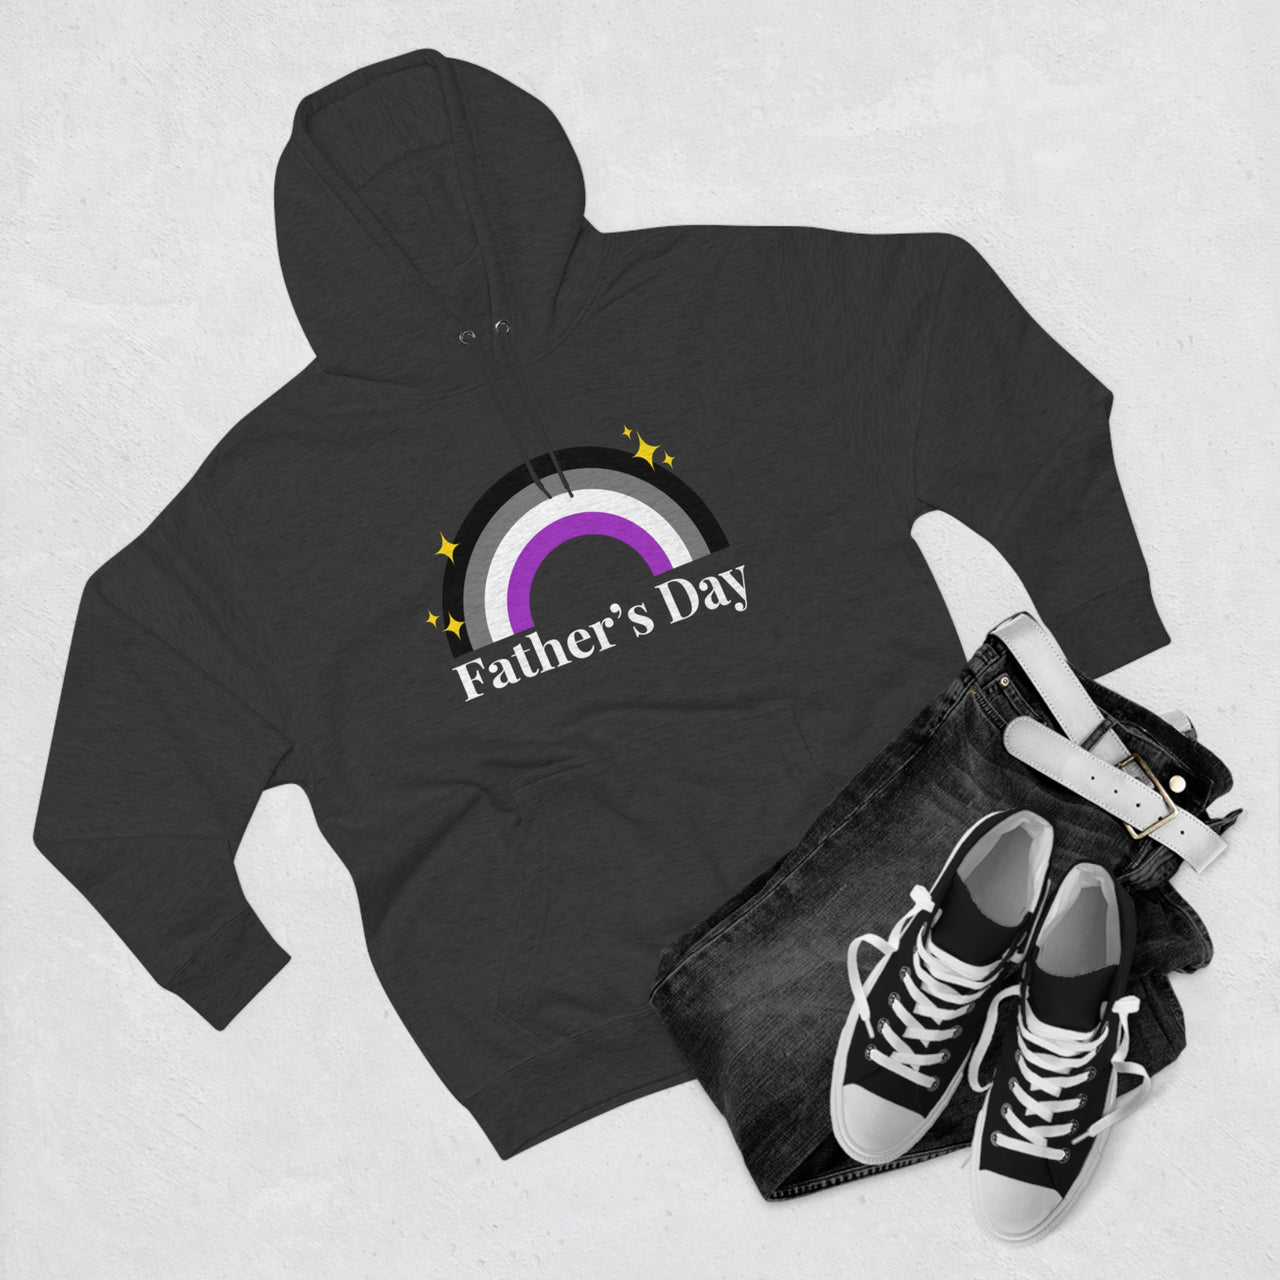 Asexual Pride Flag Unisex Premium Pullover Hoodie - Father's Day Printify